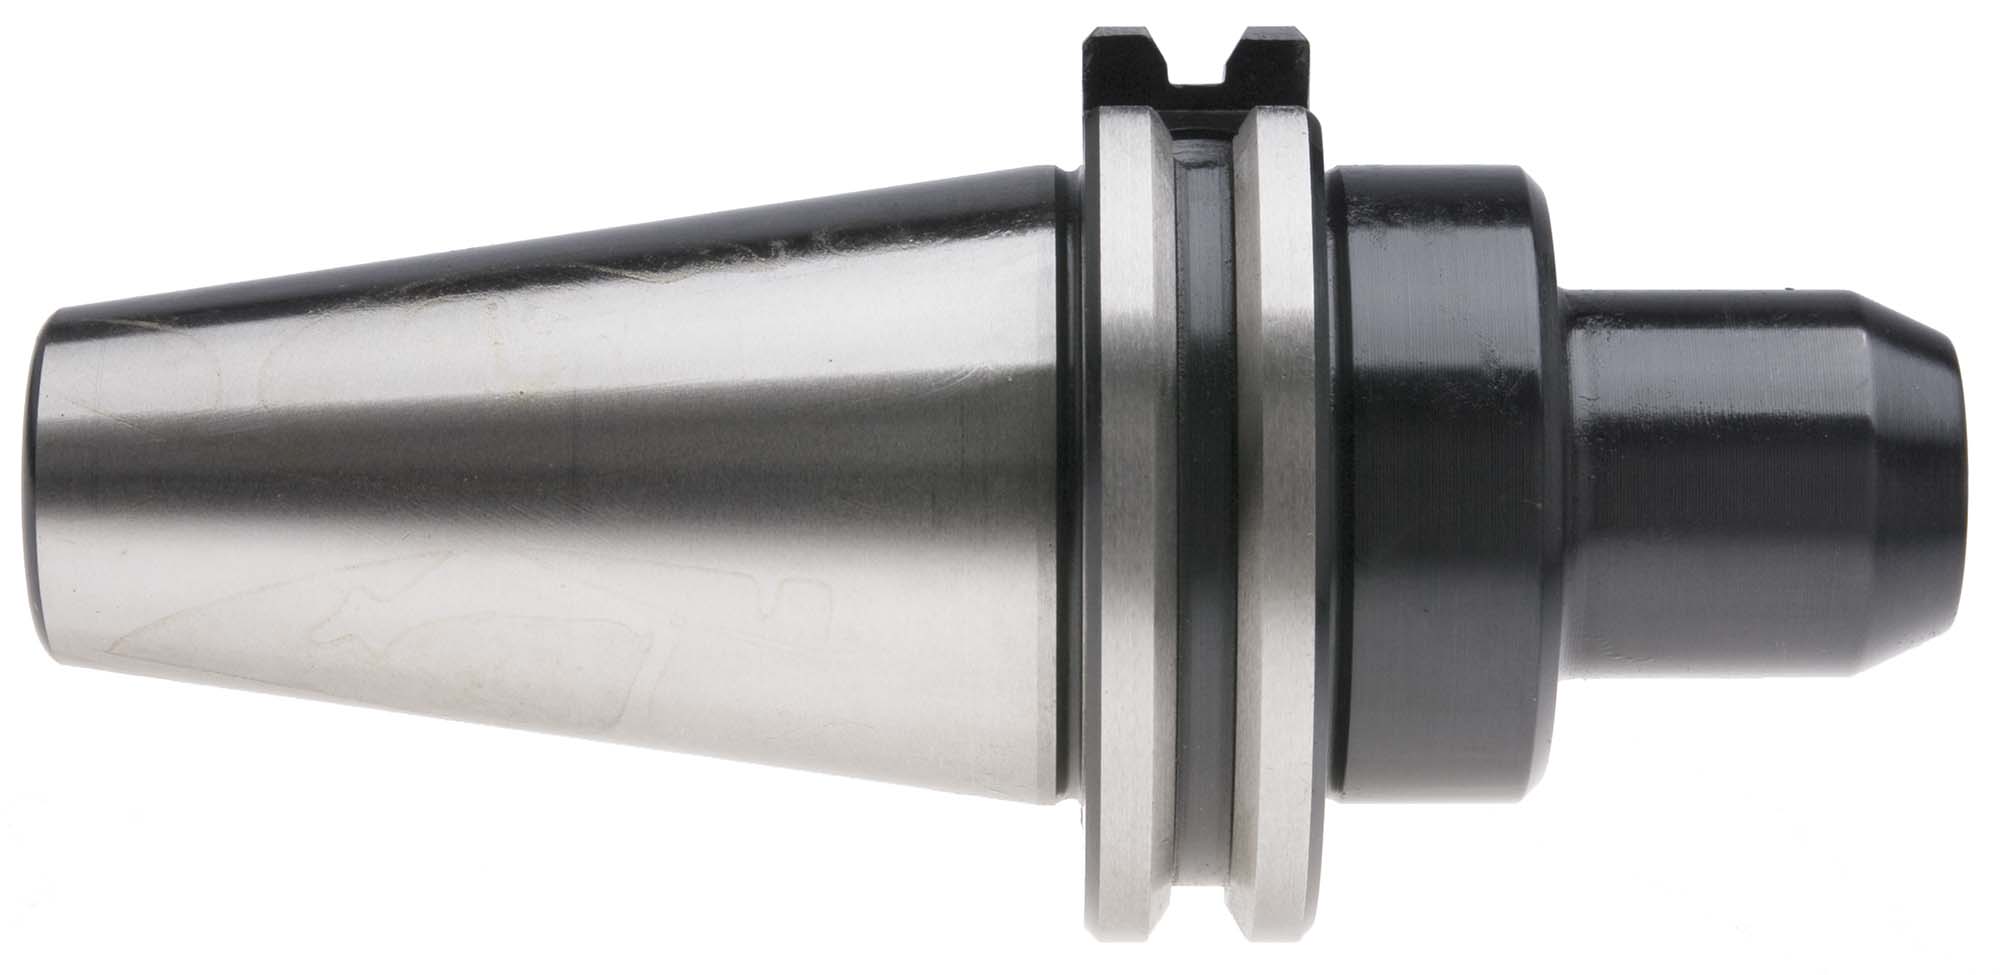 7/8" Cat 50 End Mill Adapter